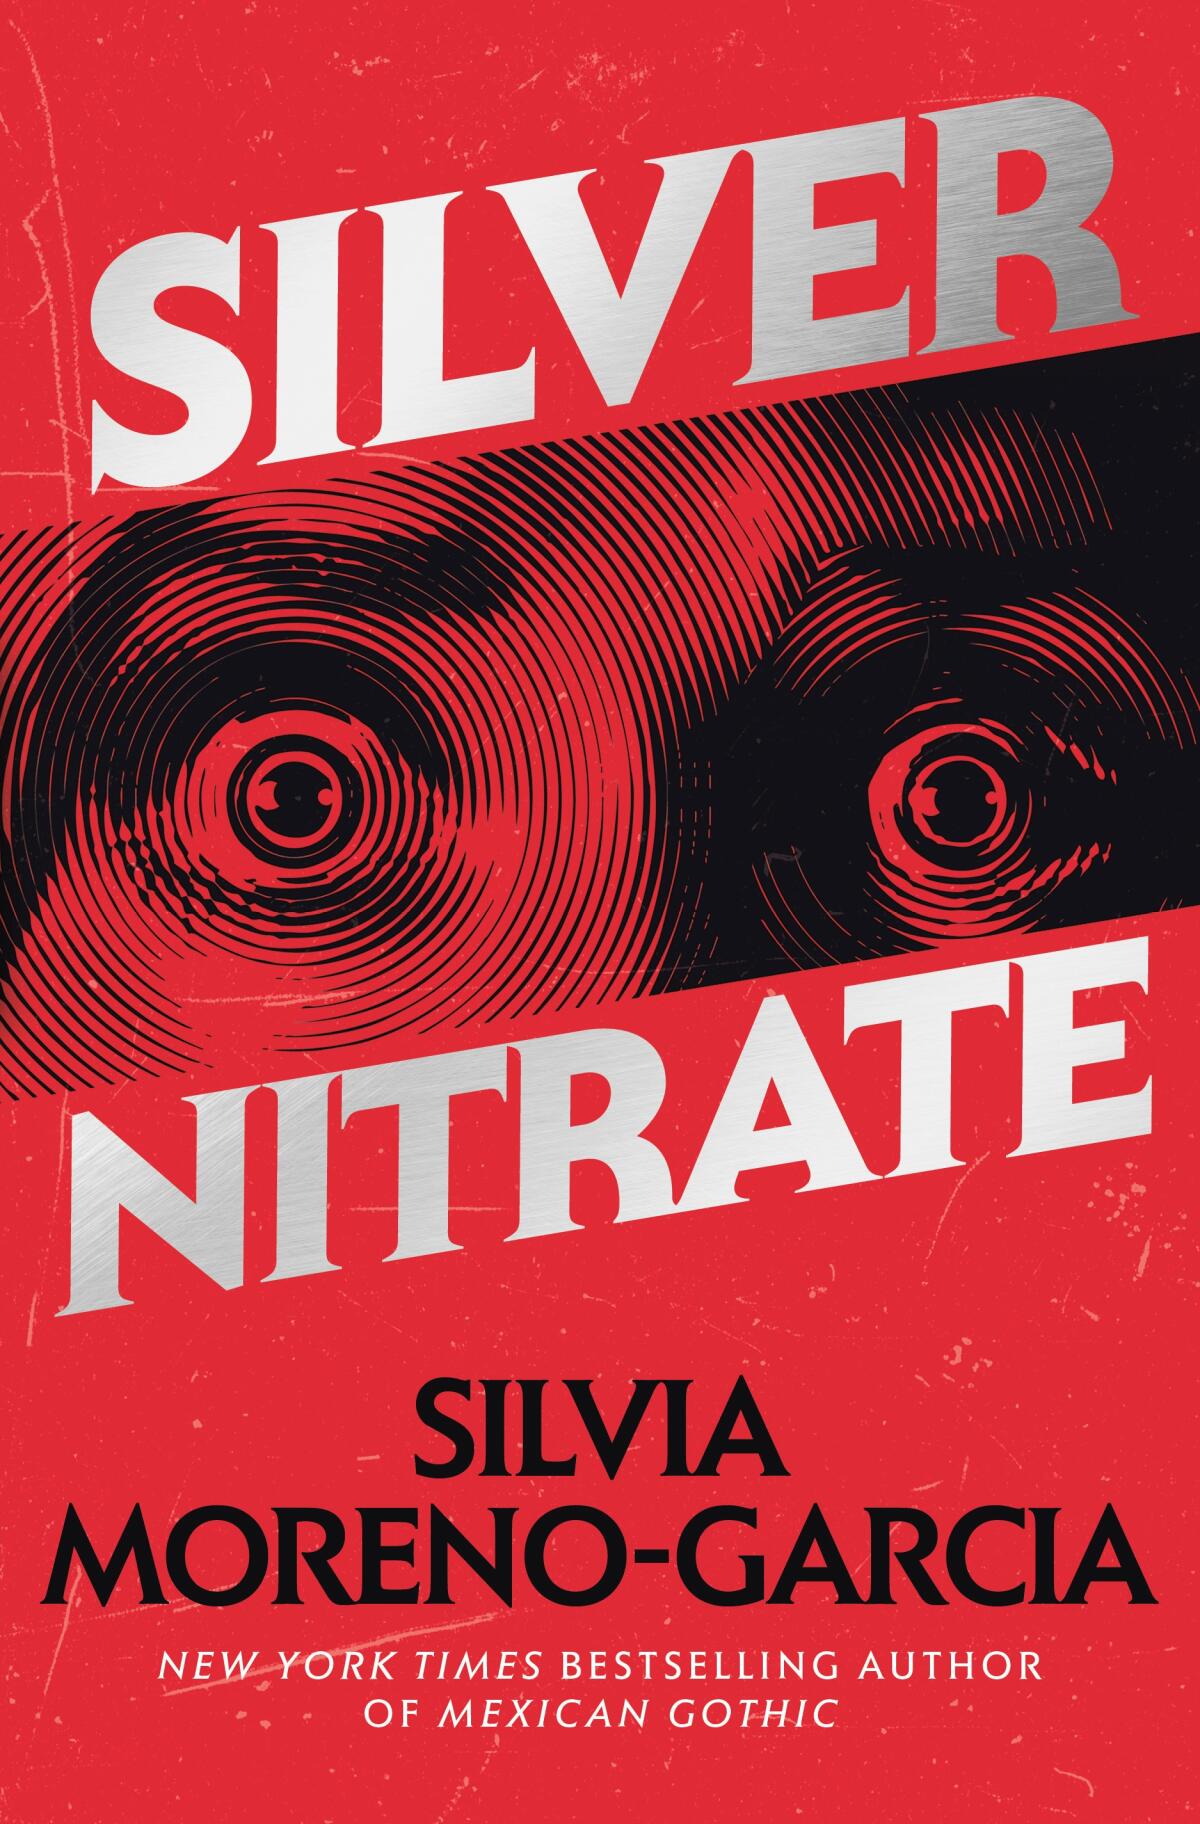 A red book cover with an illustration of shocked eyes, with the words "SILVER NITRATE" in silver.